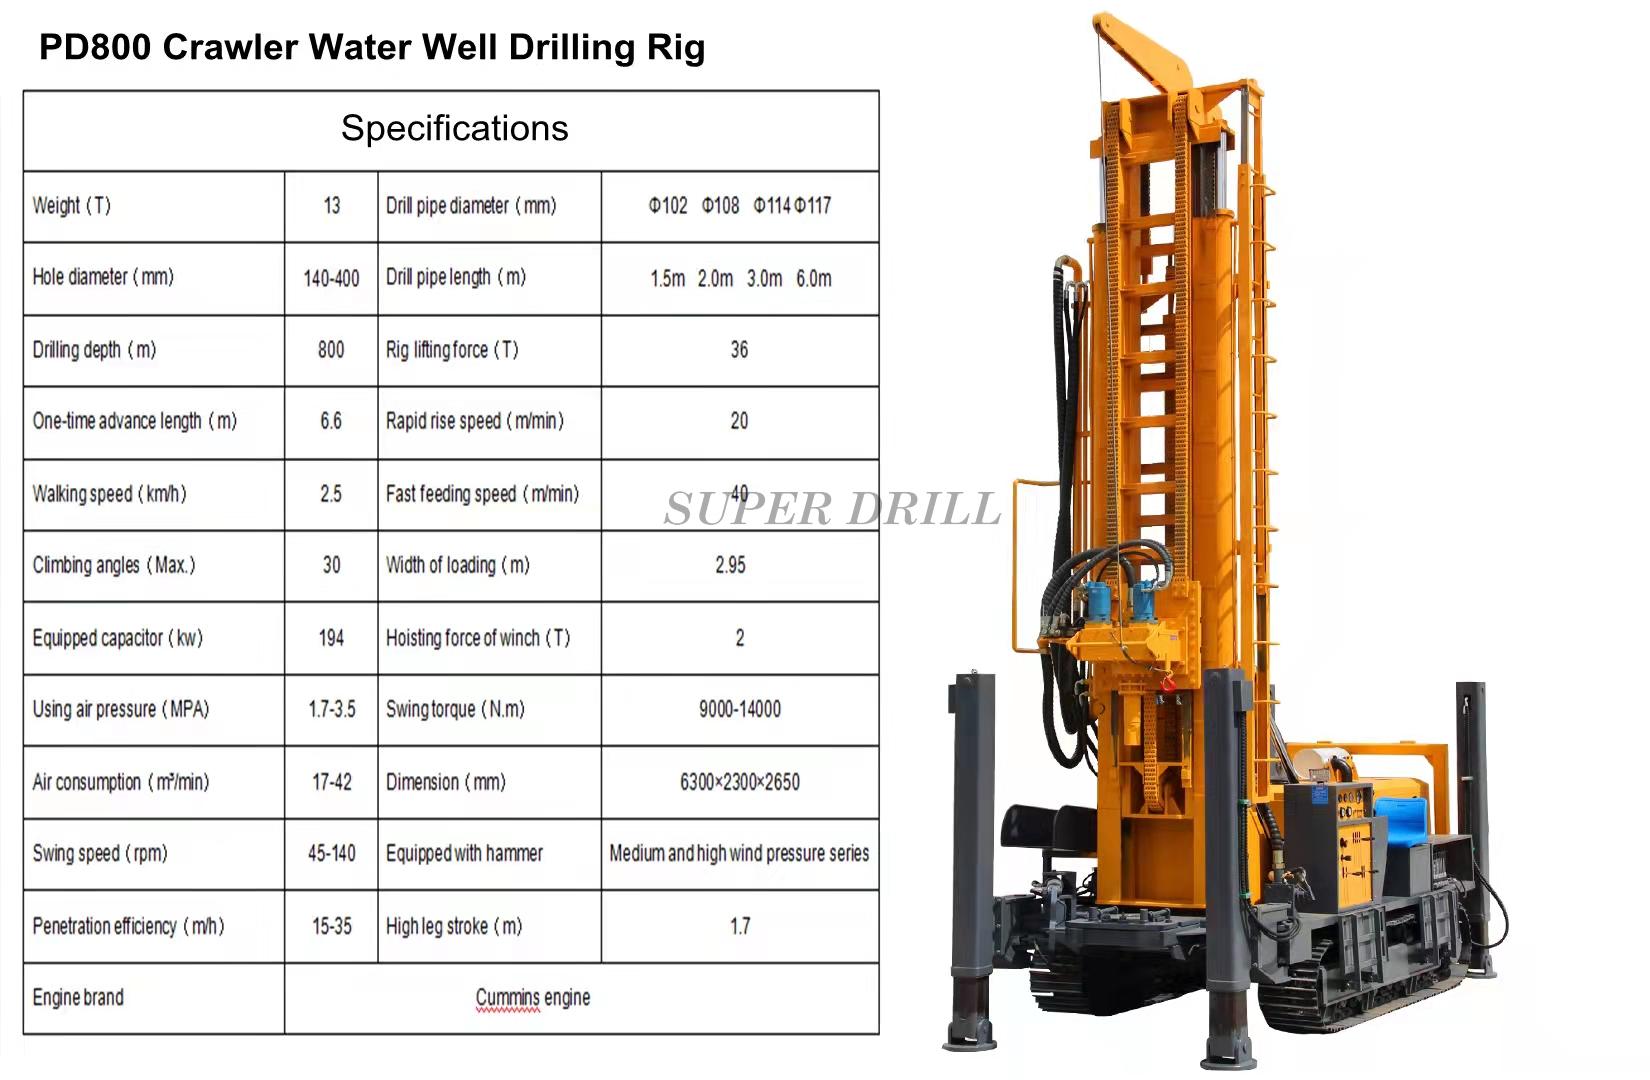 PD800 Crawler type water well drilling rig